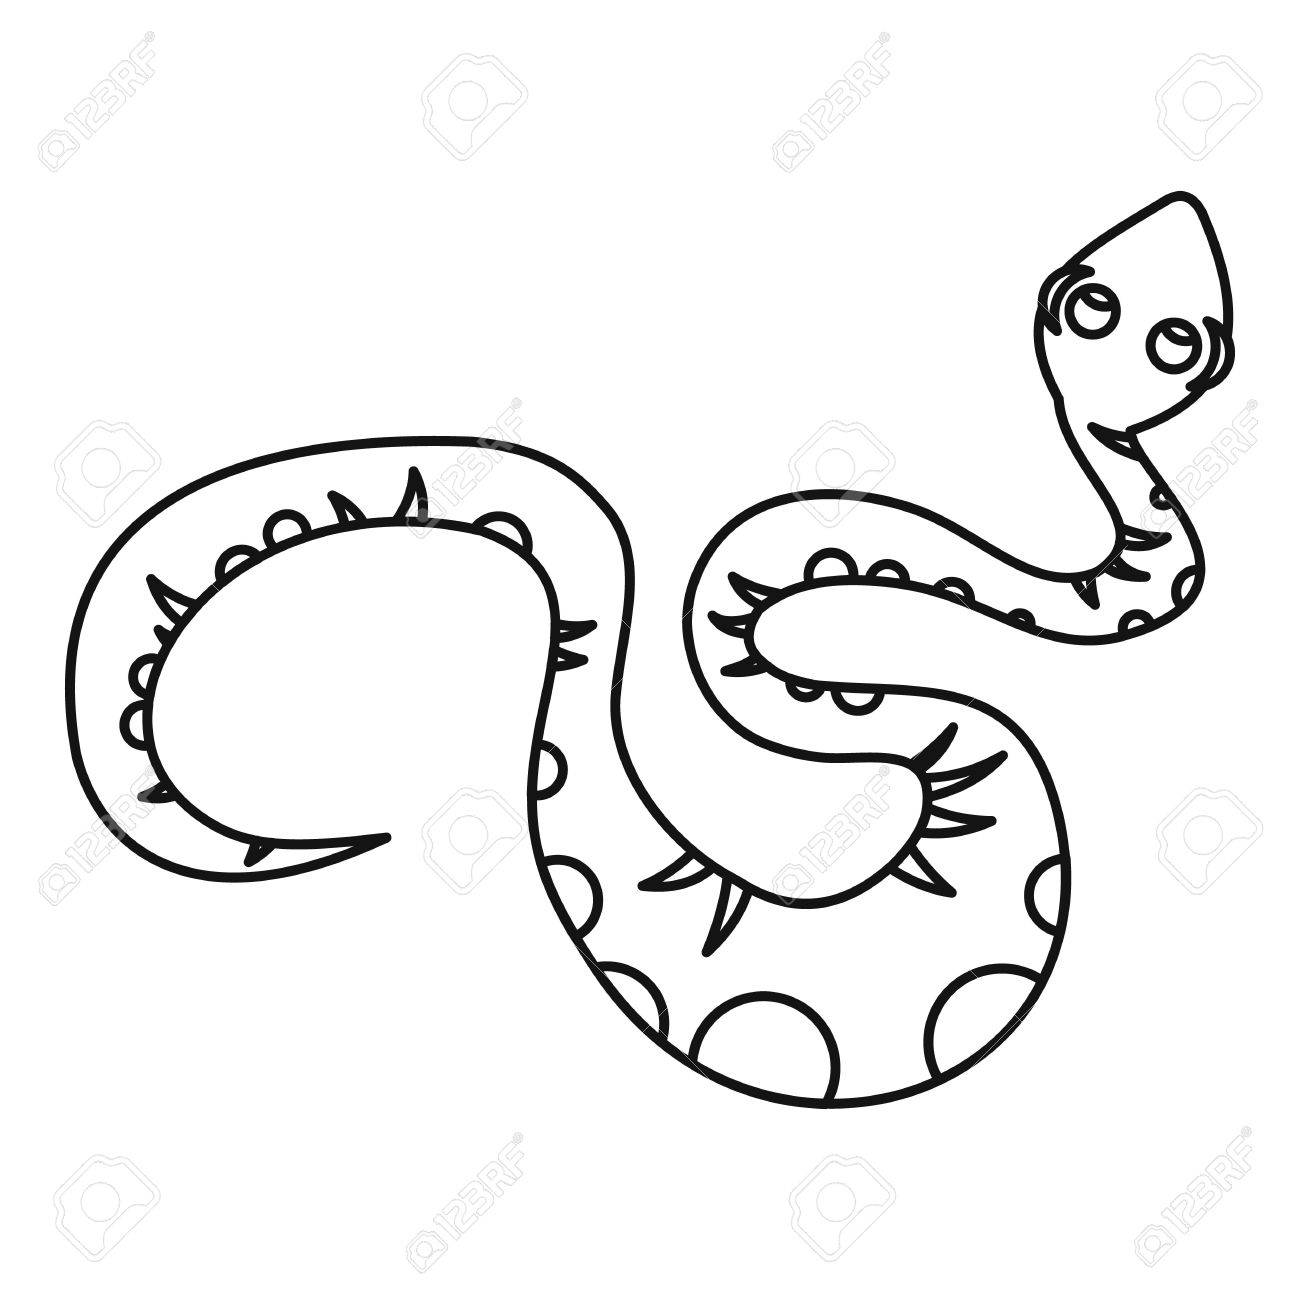 Black snake icon in outline style isolated on white background...